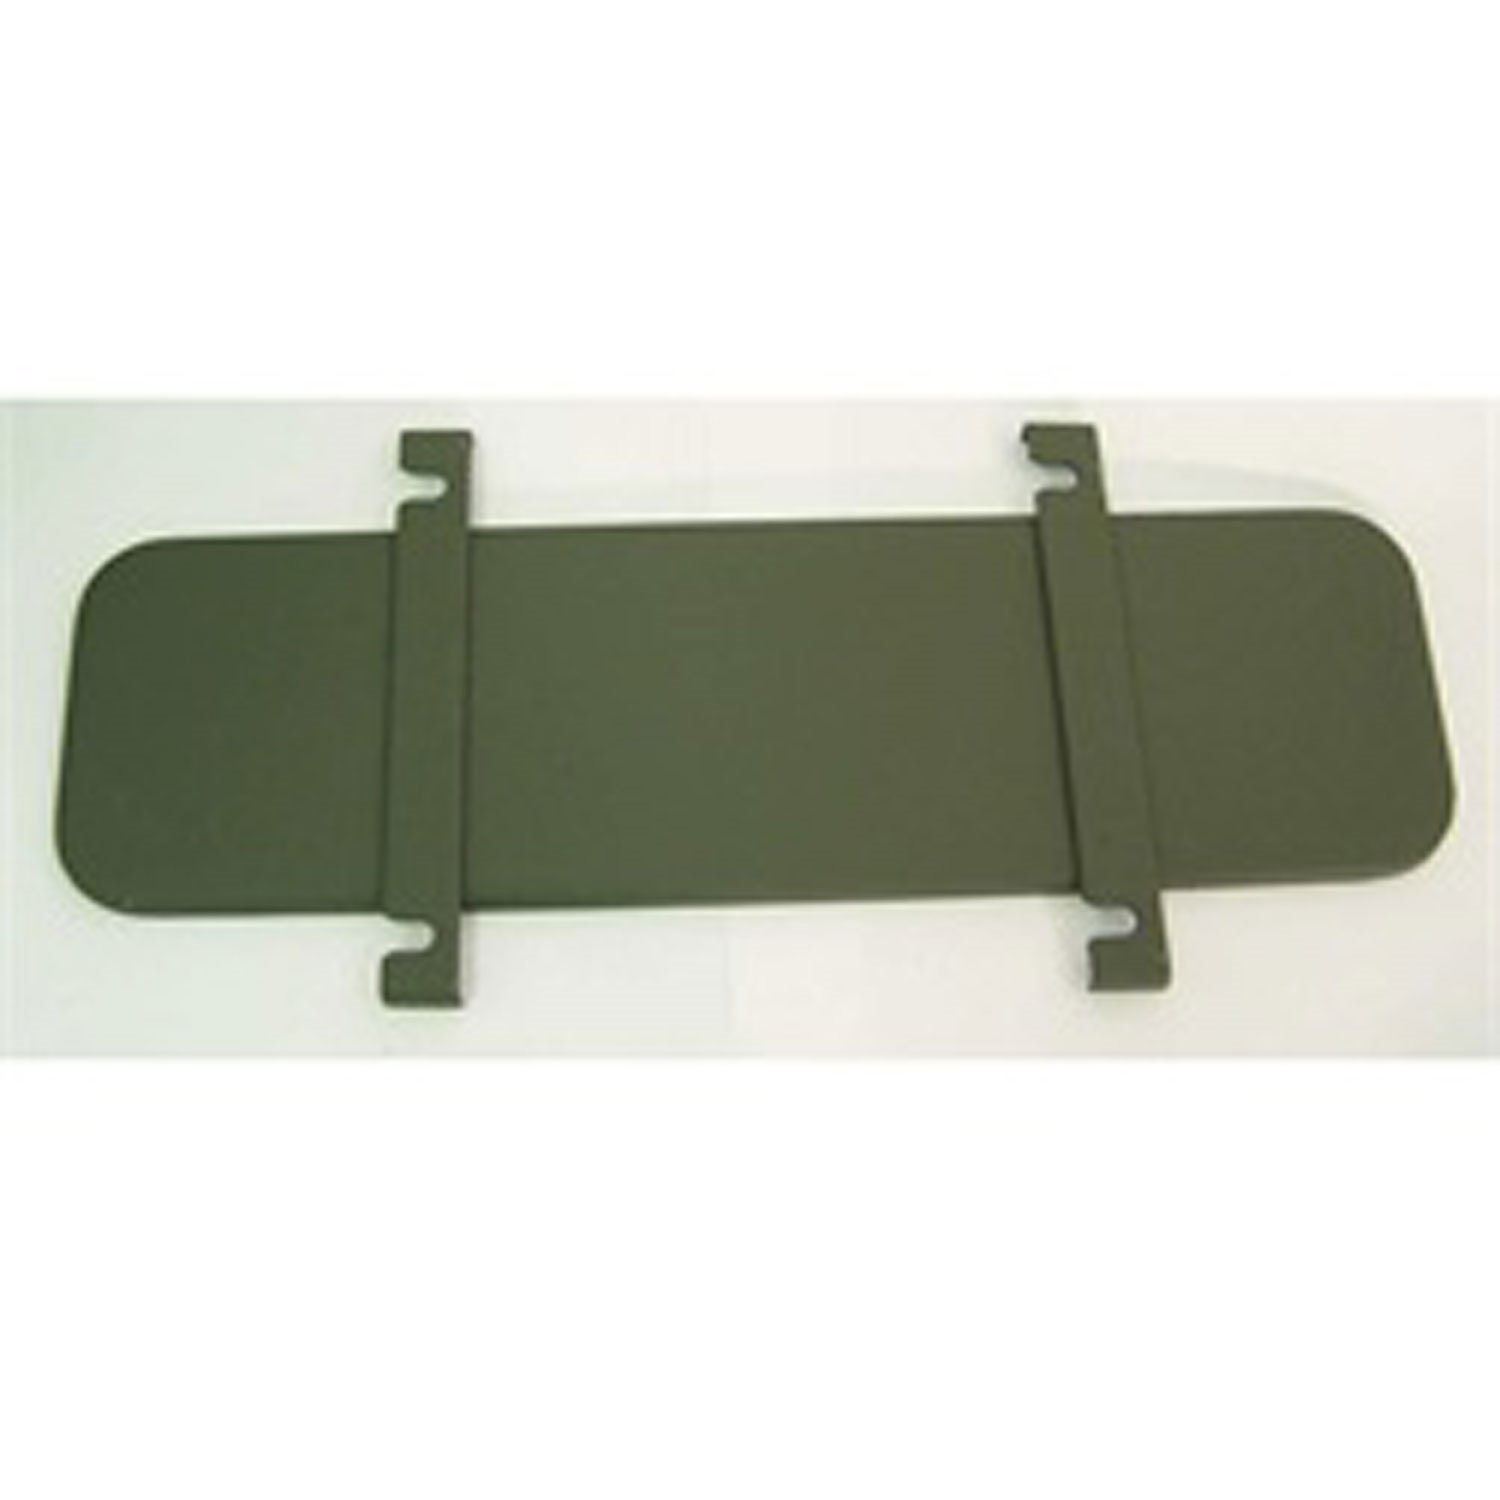 This windshield-mounted ventilator cover from Omix-ADA fits 50-52